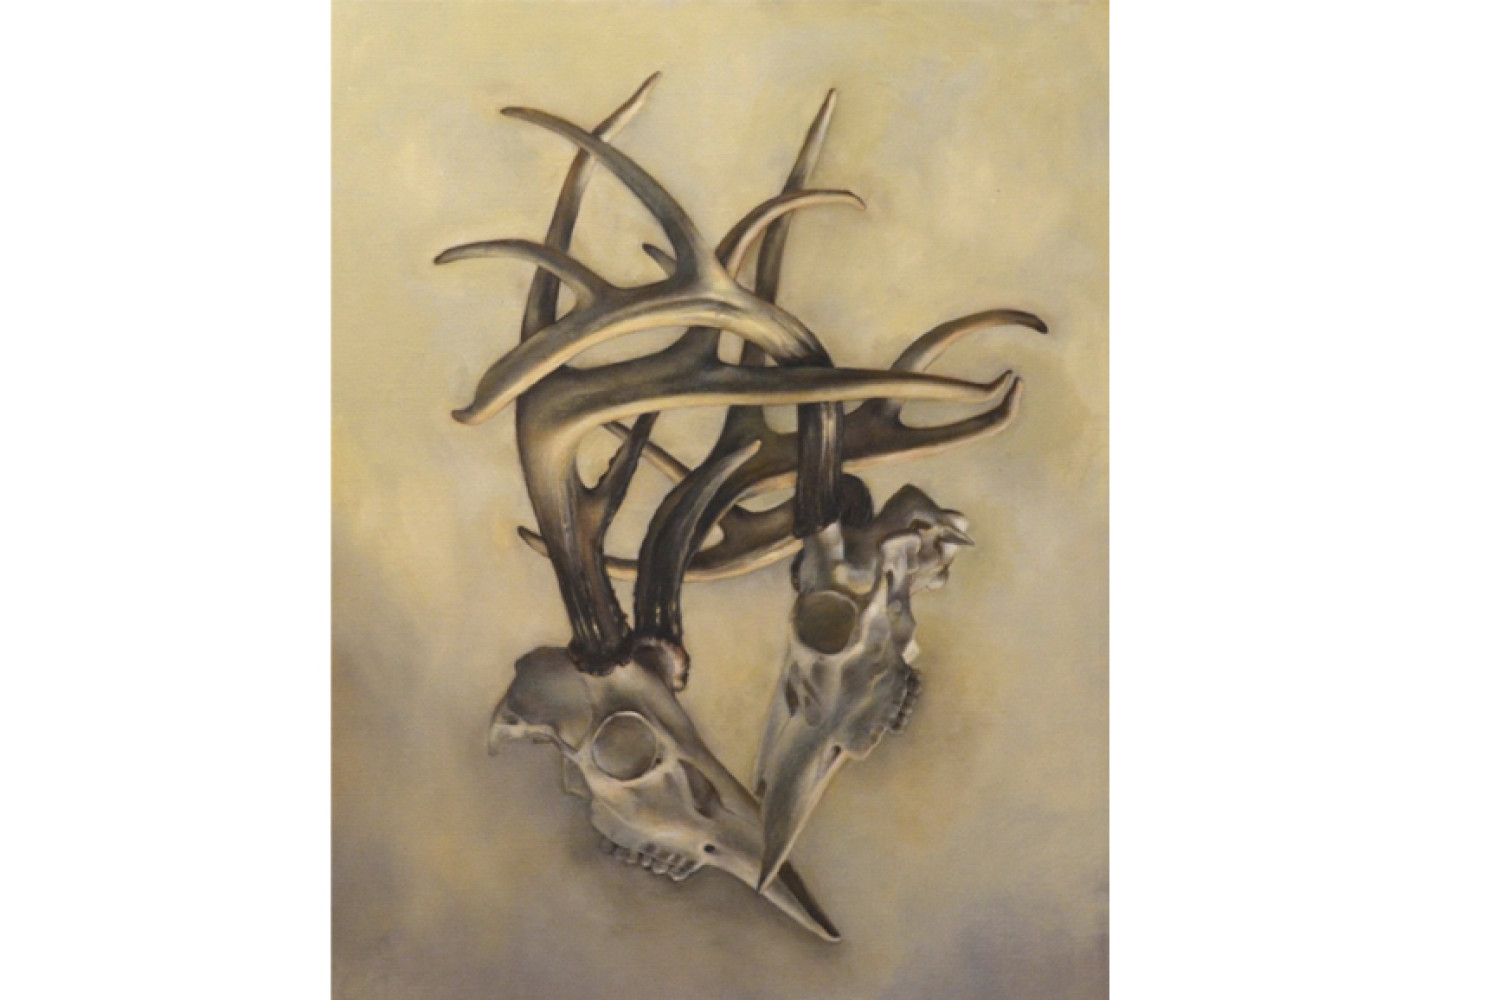 Locked Horns, By Jill Hooper (American, b. 1970); Oil on linen; 29 x 22 inches; Courtesy of a private collection